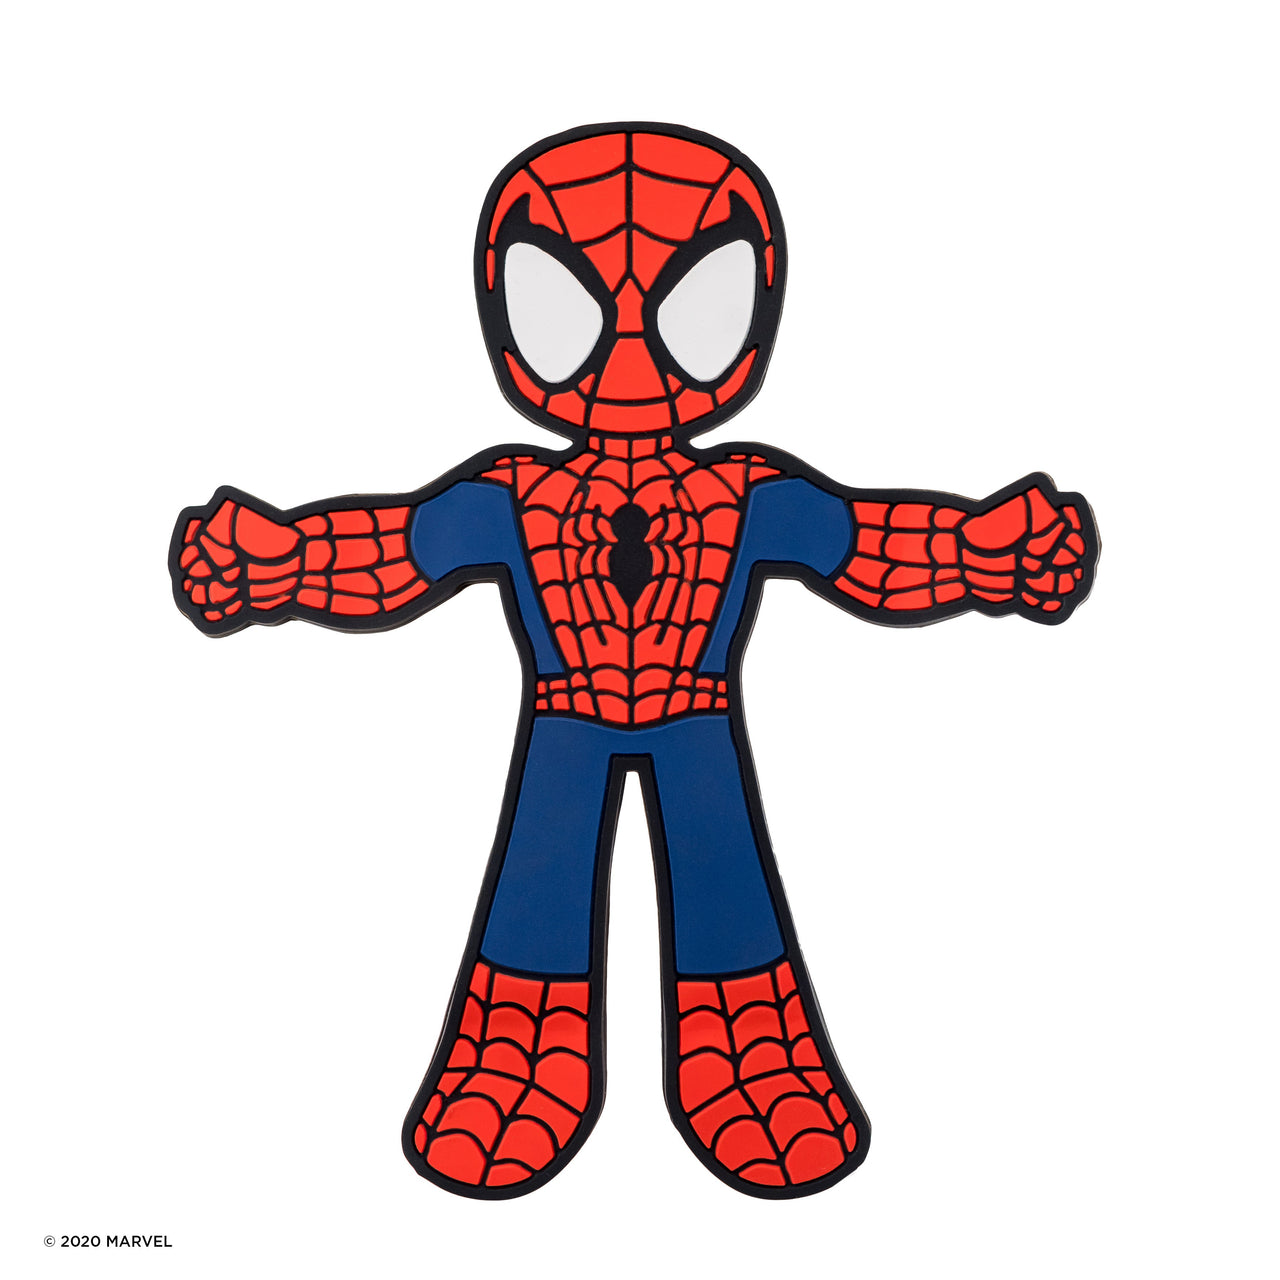 Image of Marvel Comics Spider-Man Hug Buddy with arms and legs in the open position on a white background